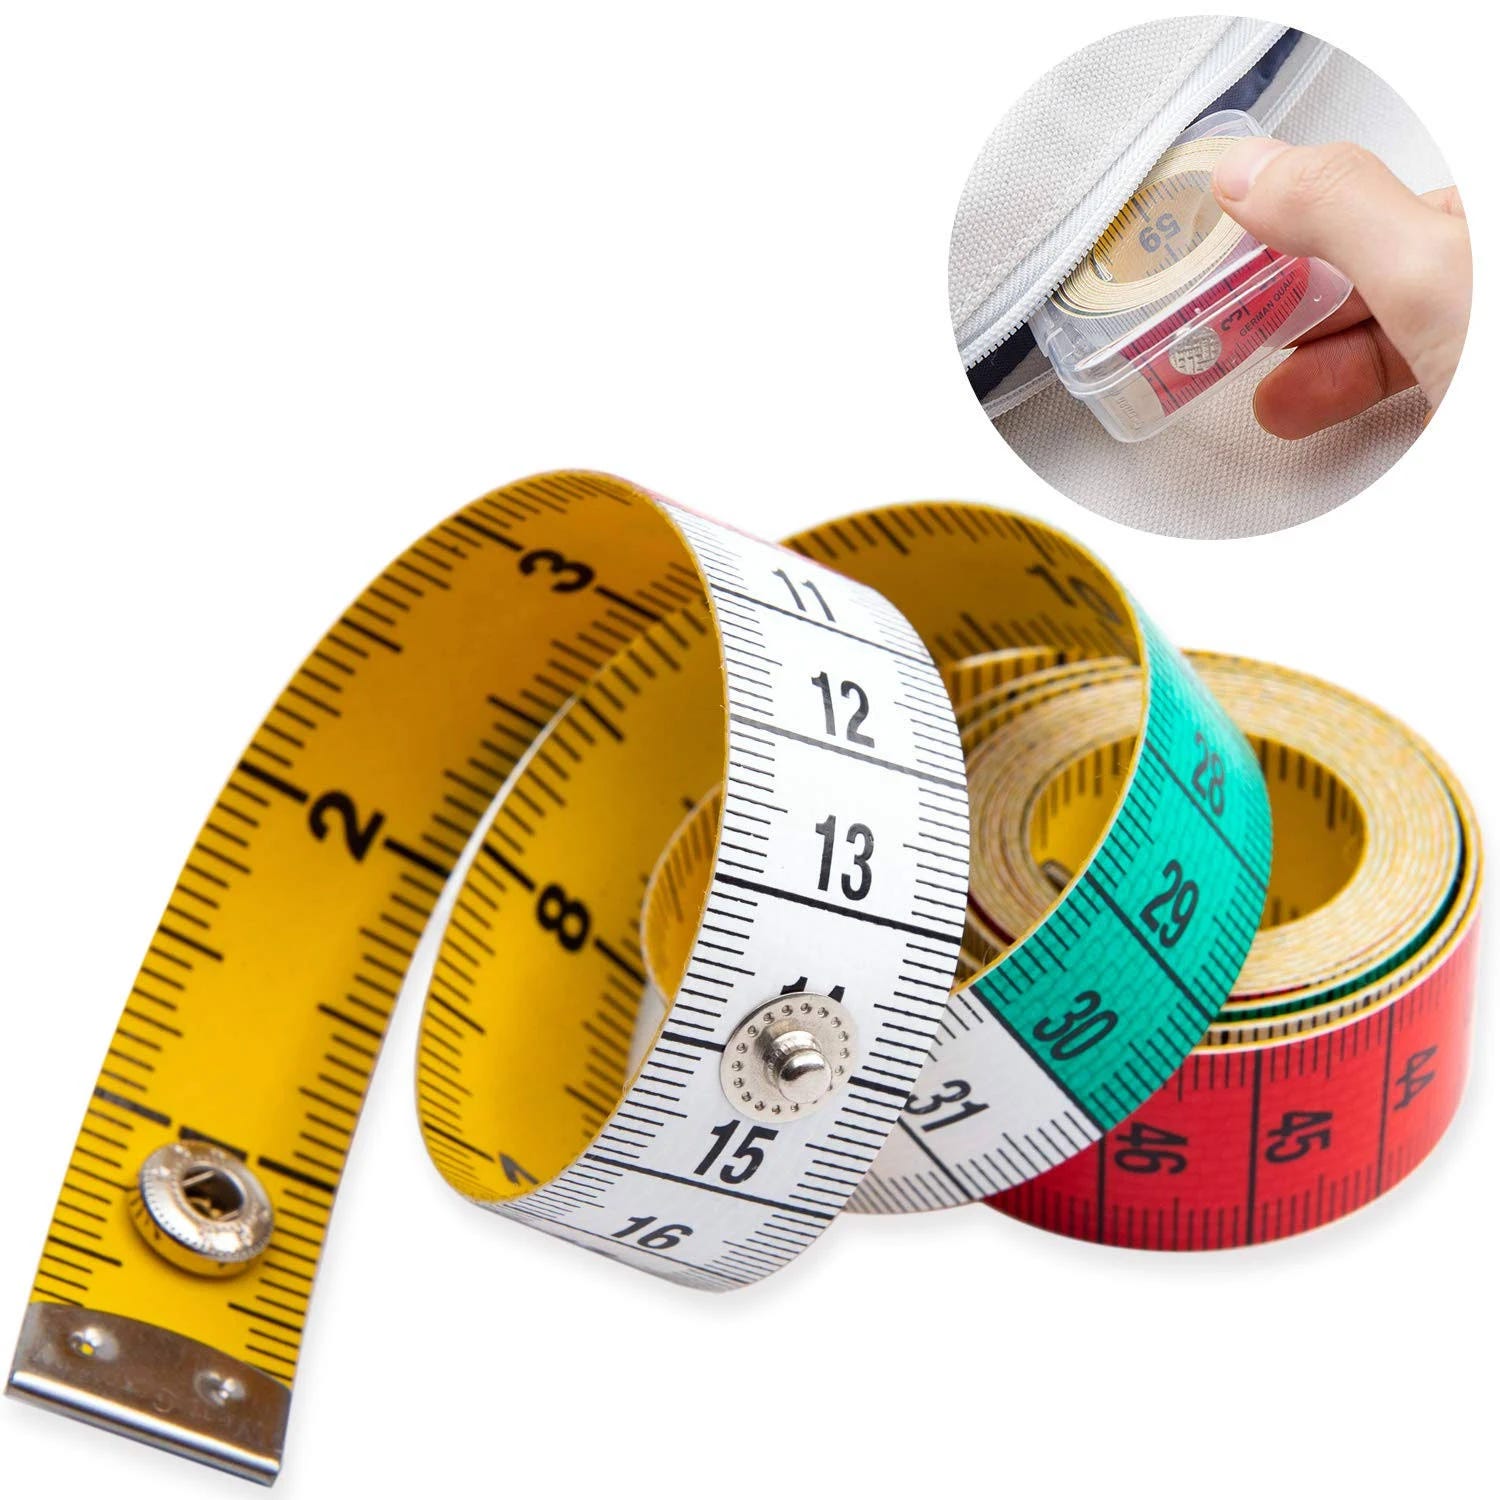 Versatile Soft PU Fabric Tape Measure for Sewing, Crafting, and Home Use | Image